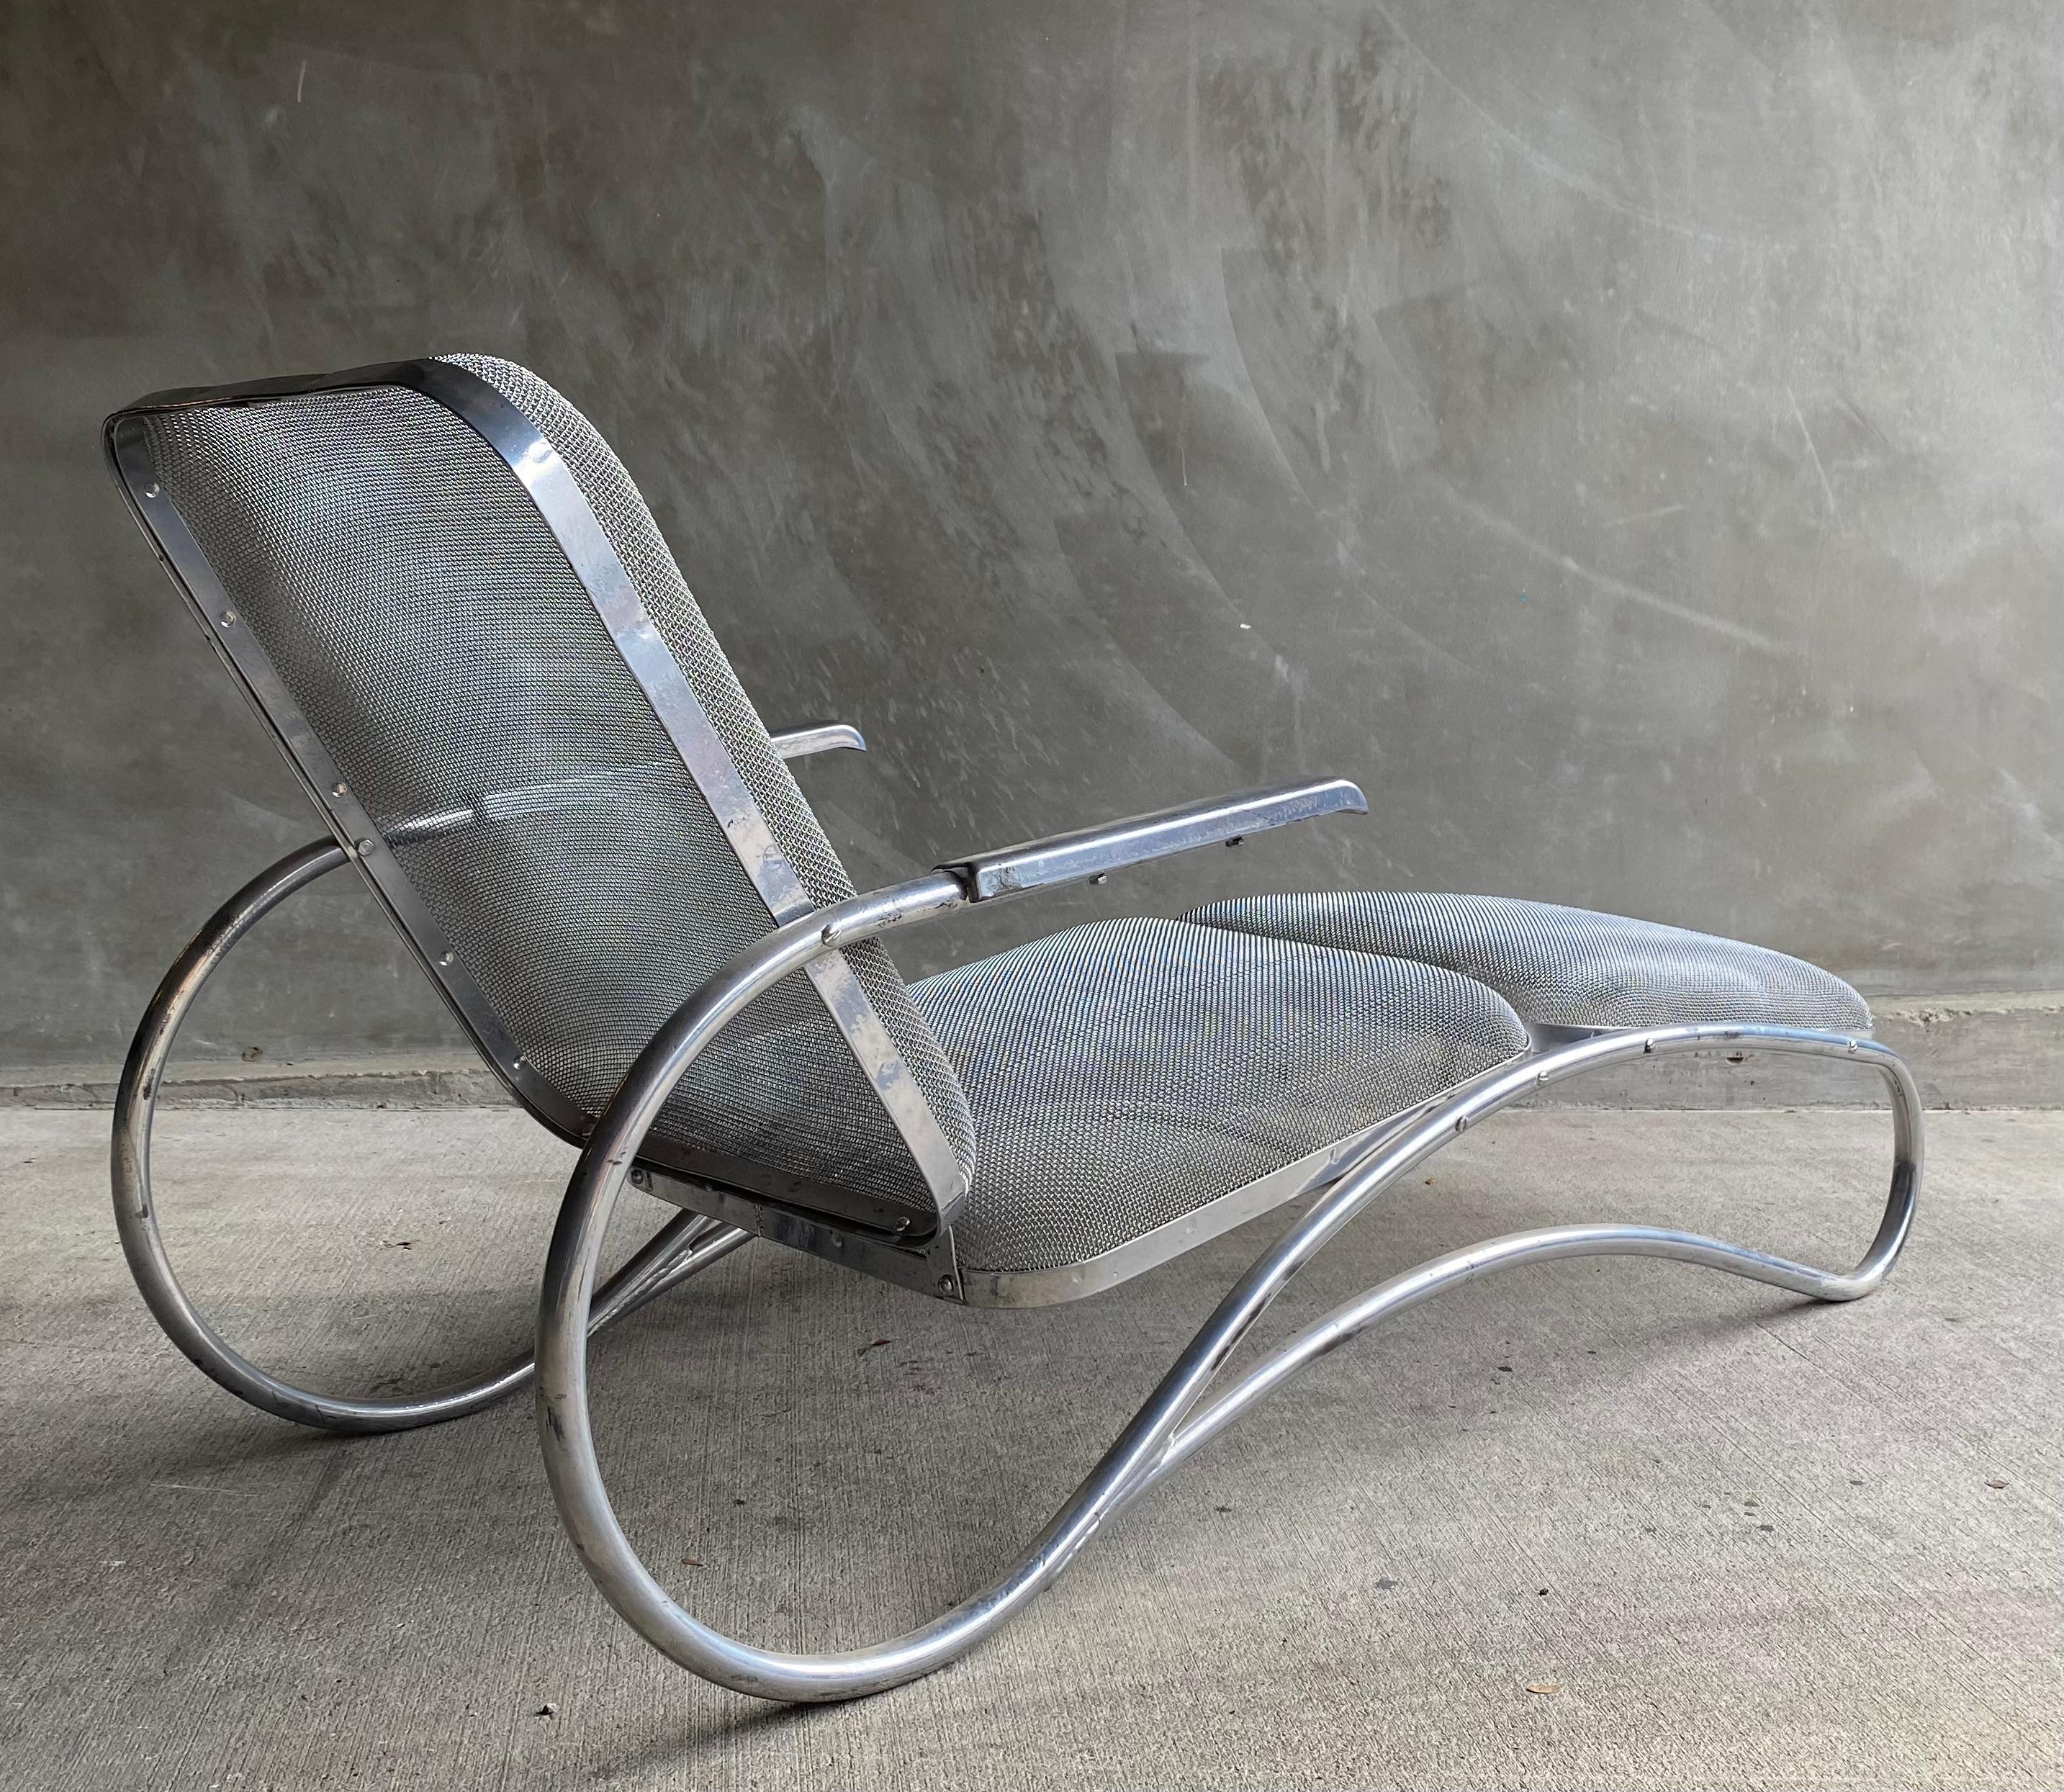 Streamline Era Tubular Frame Chaise Lounge, American, 1940s In Good Condition For Sale In Austin, TX